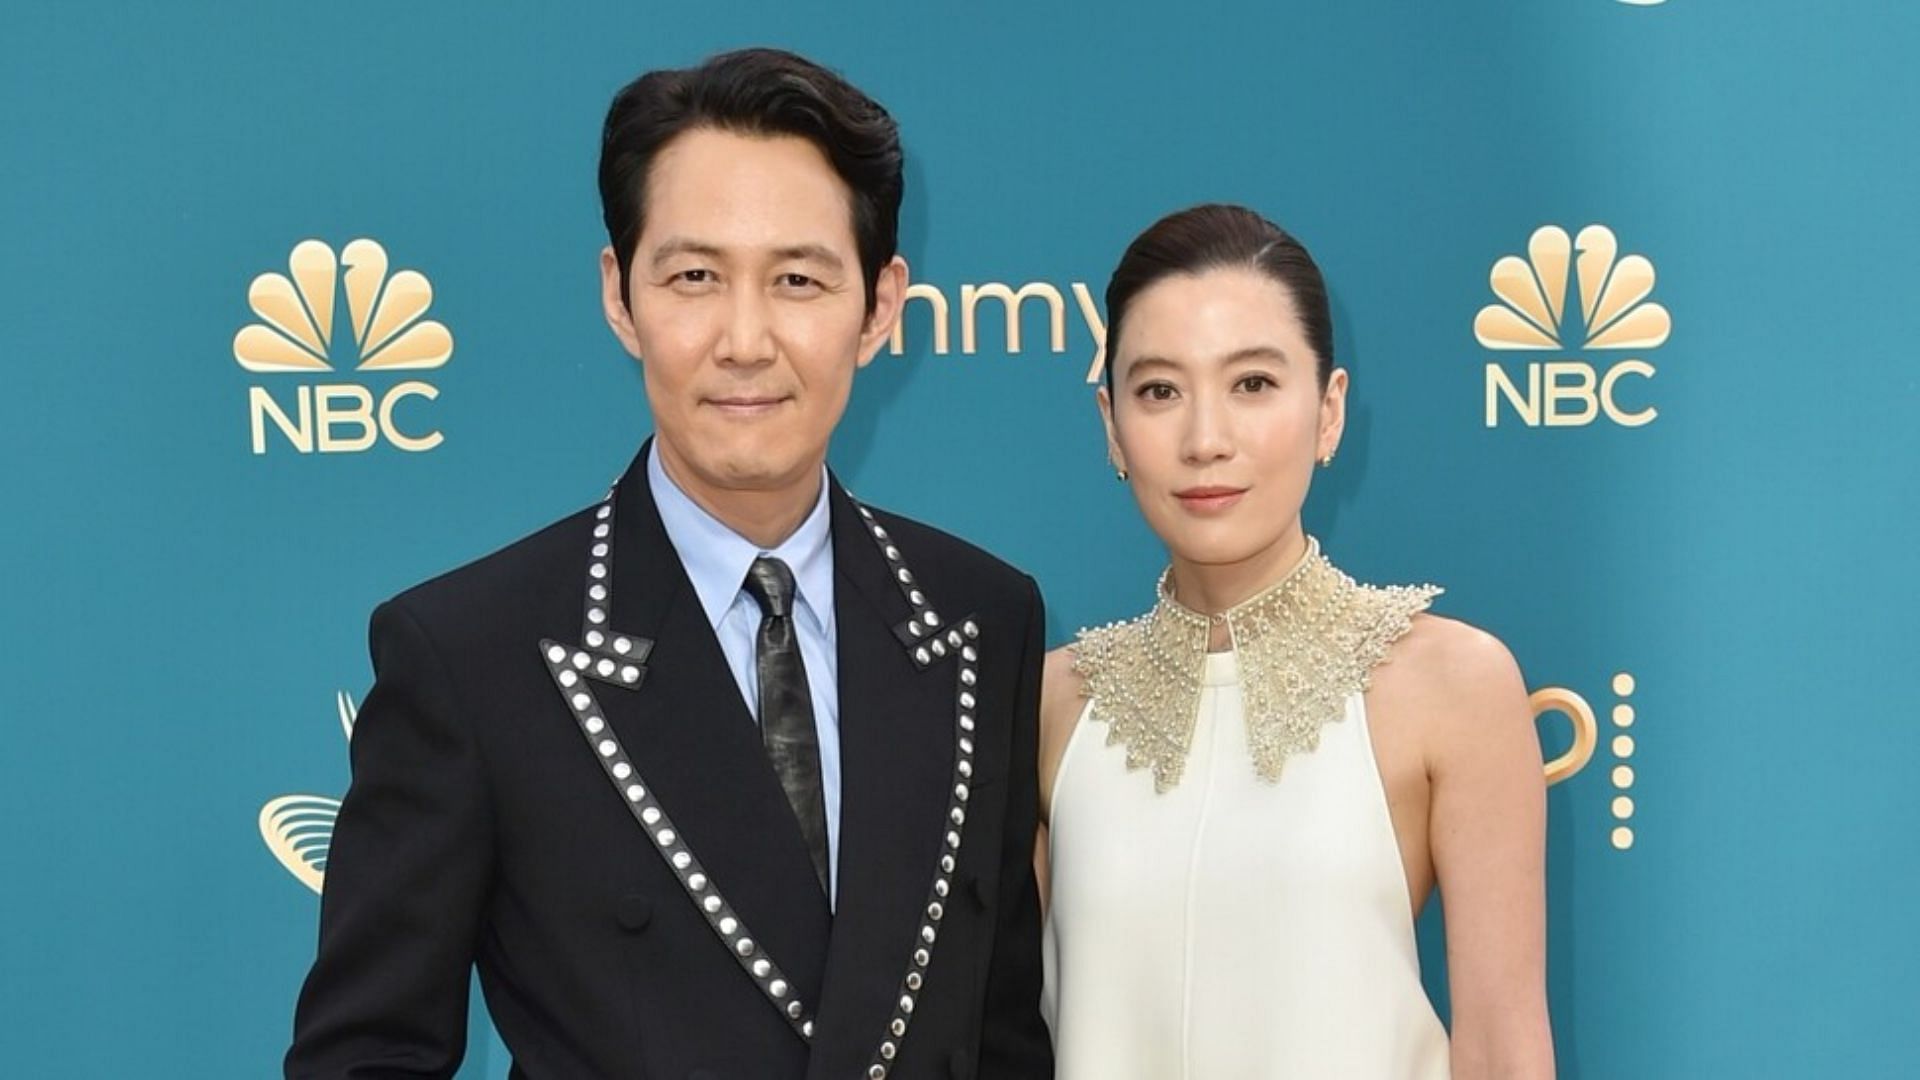 Lee Jung-jae and his girlfriend Lim Su-ryung at the 2022 Emmy Awards (Image via Twitter/@Flitto_Inc)